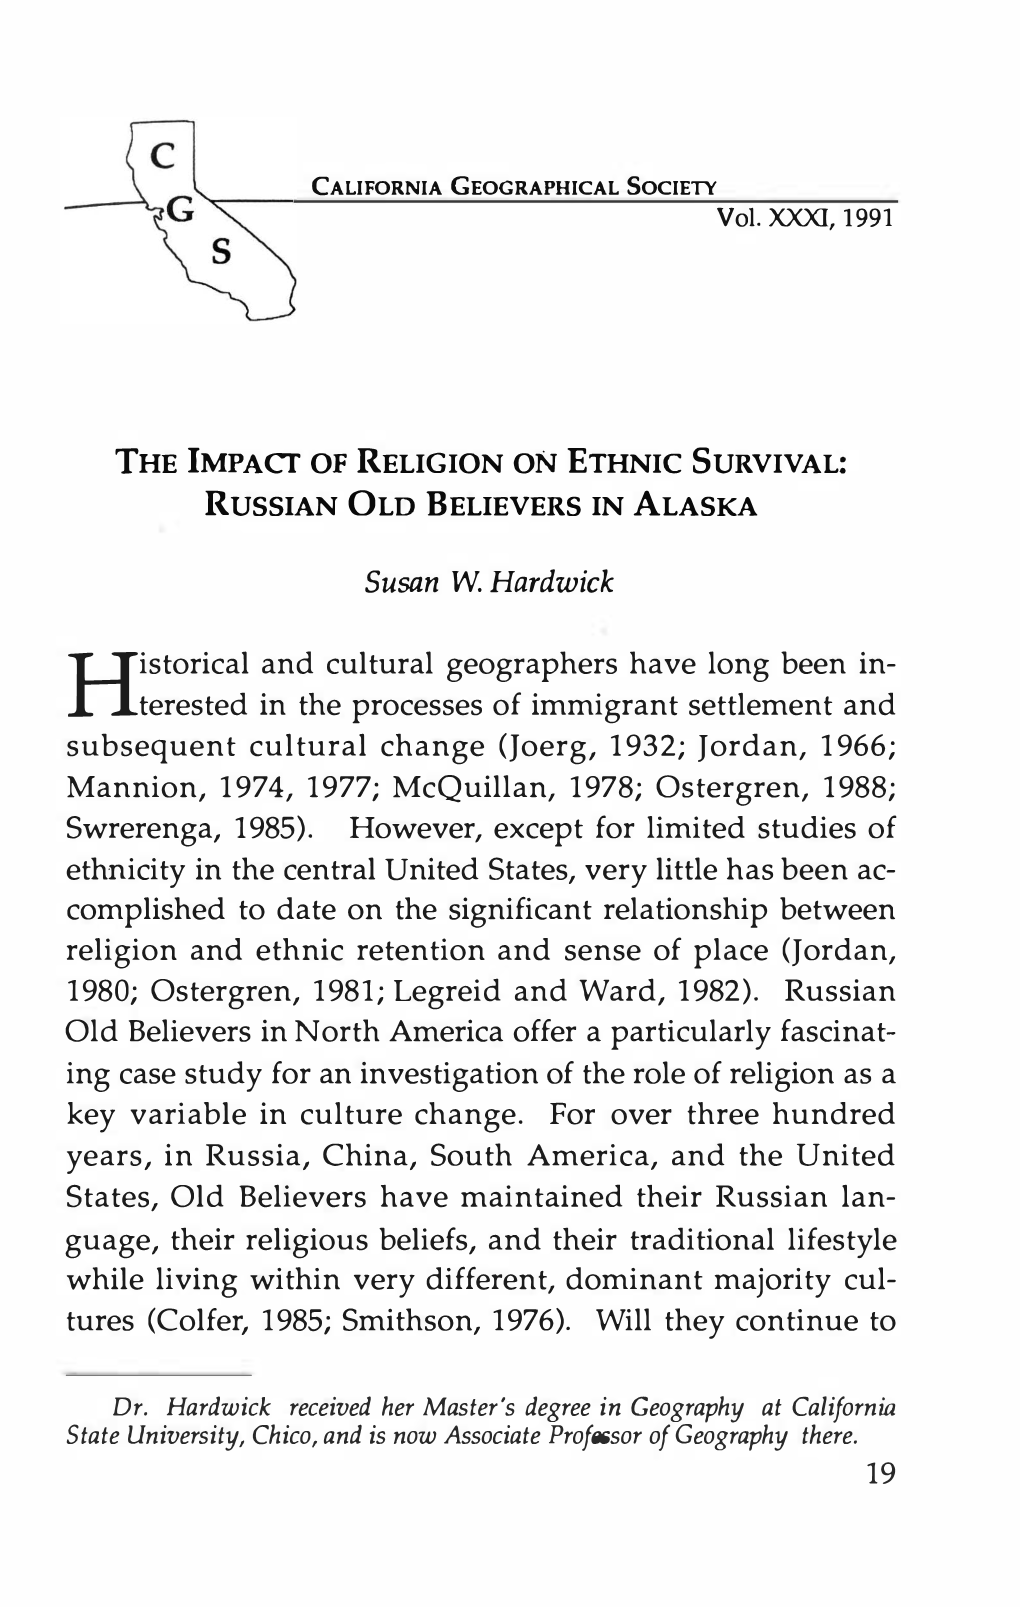 The Impact of Religion on Ethnic Survival: Russian Old Believers in Al Aska